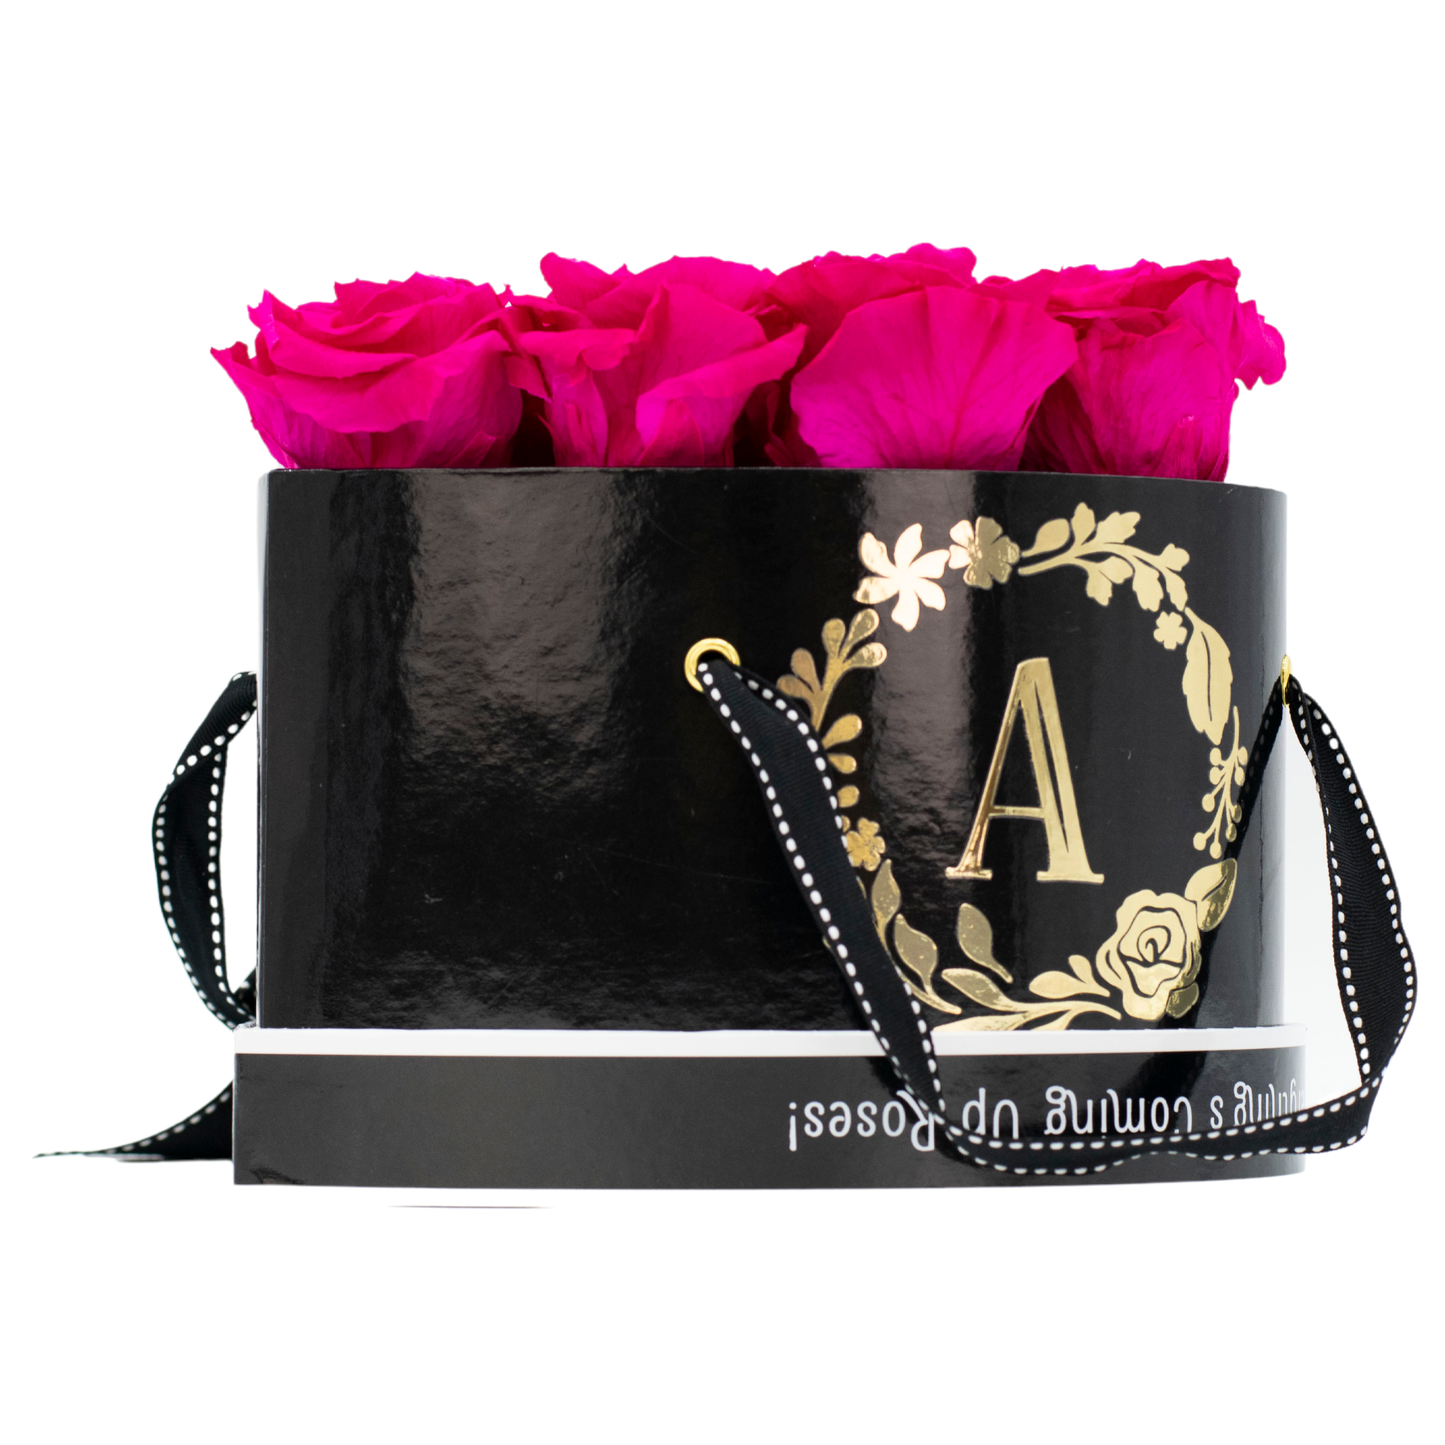 The Black Monogrammed Lucky 13 - Raspberry Punch Roses